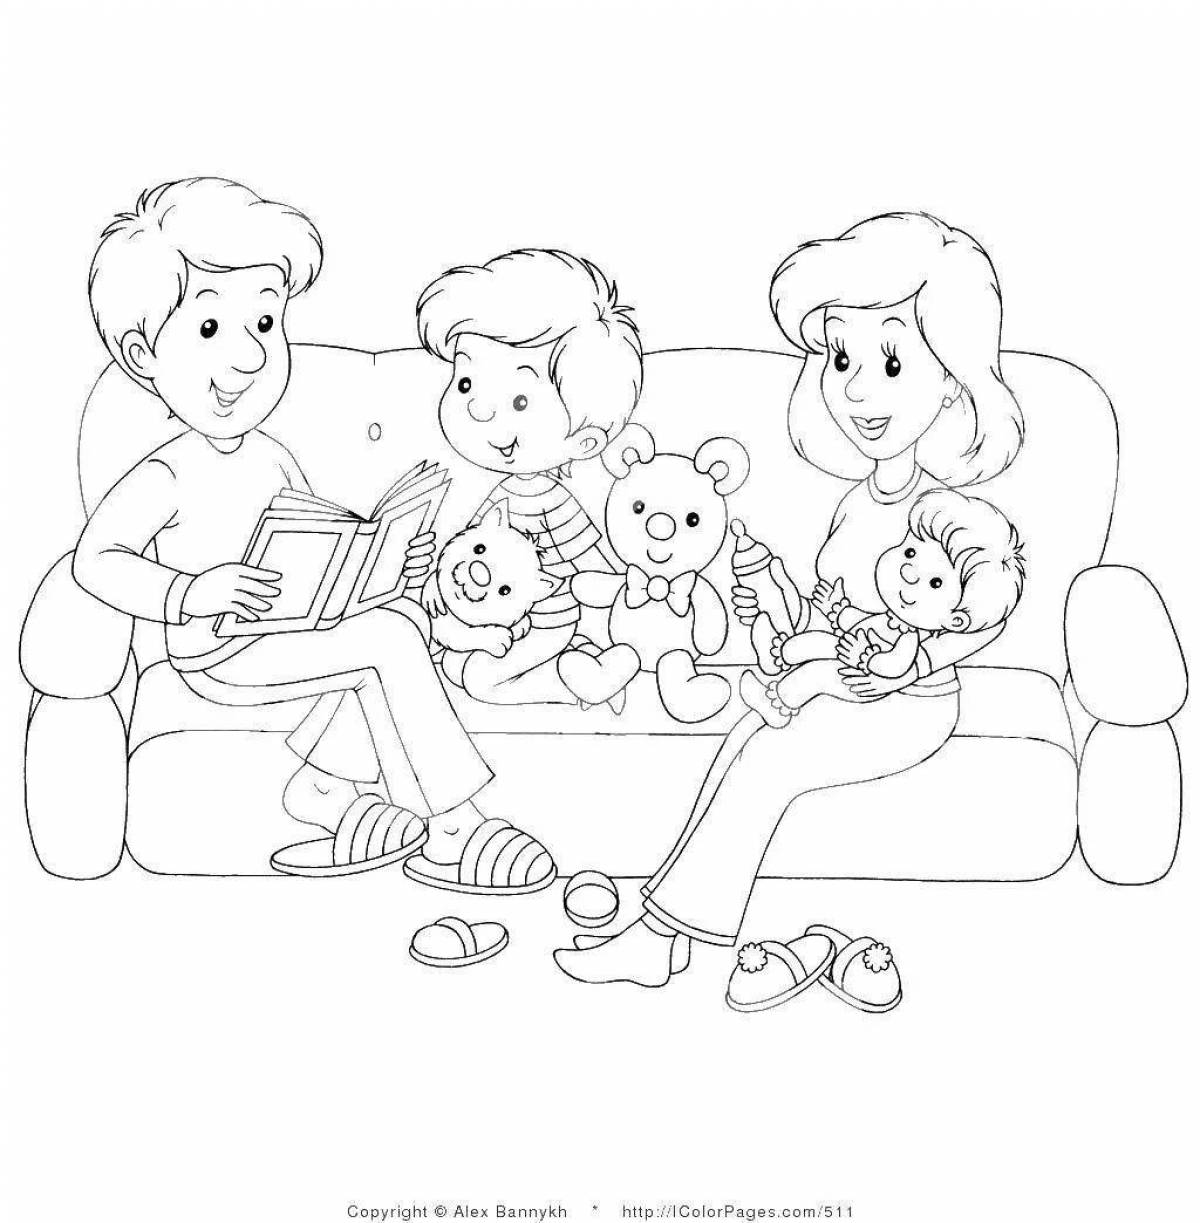 Charming family coloring book